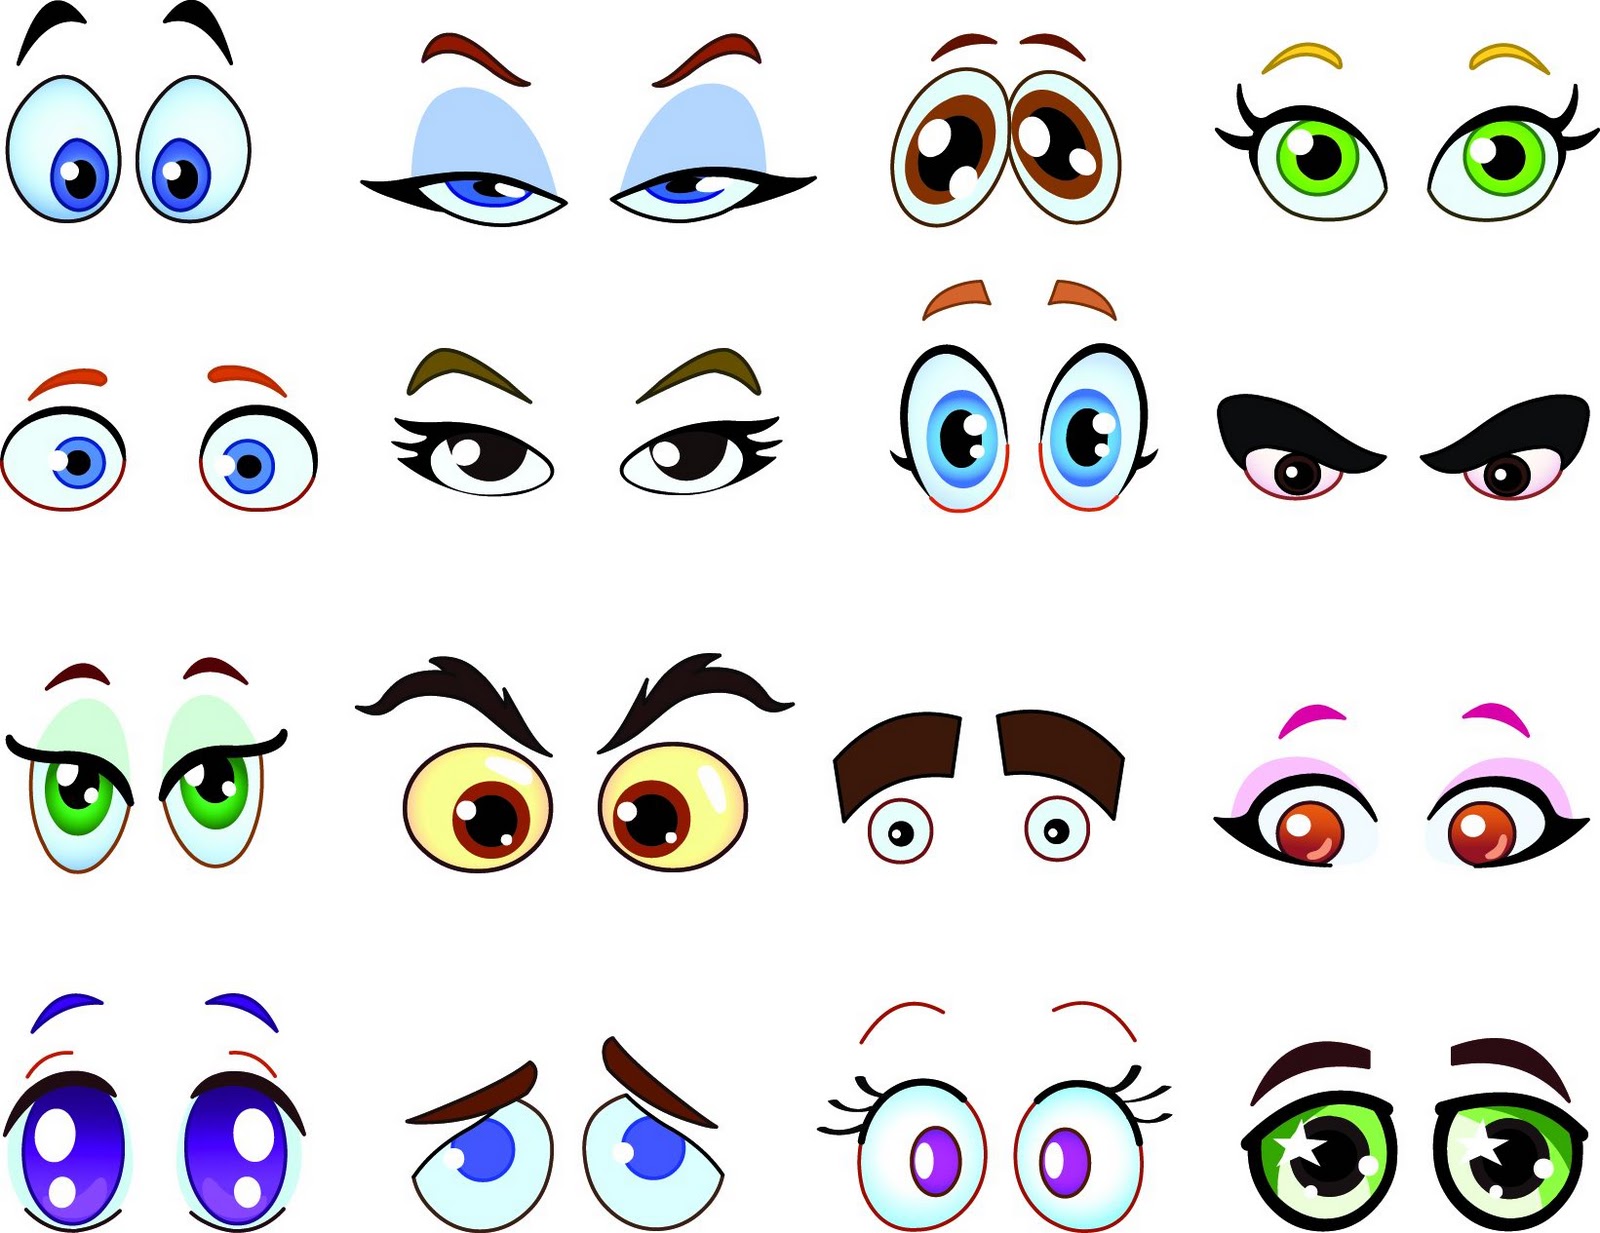 Happy Eyes Cartoon Images & Pictures - Becuo